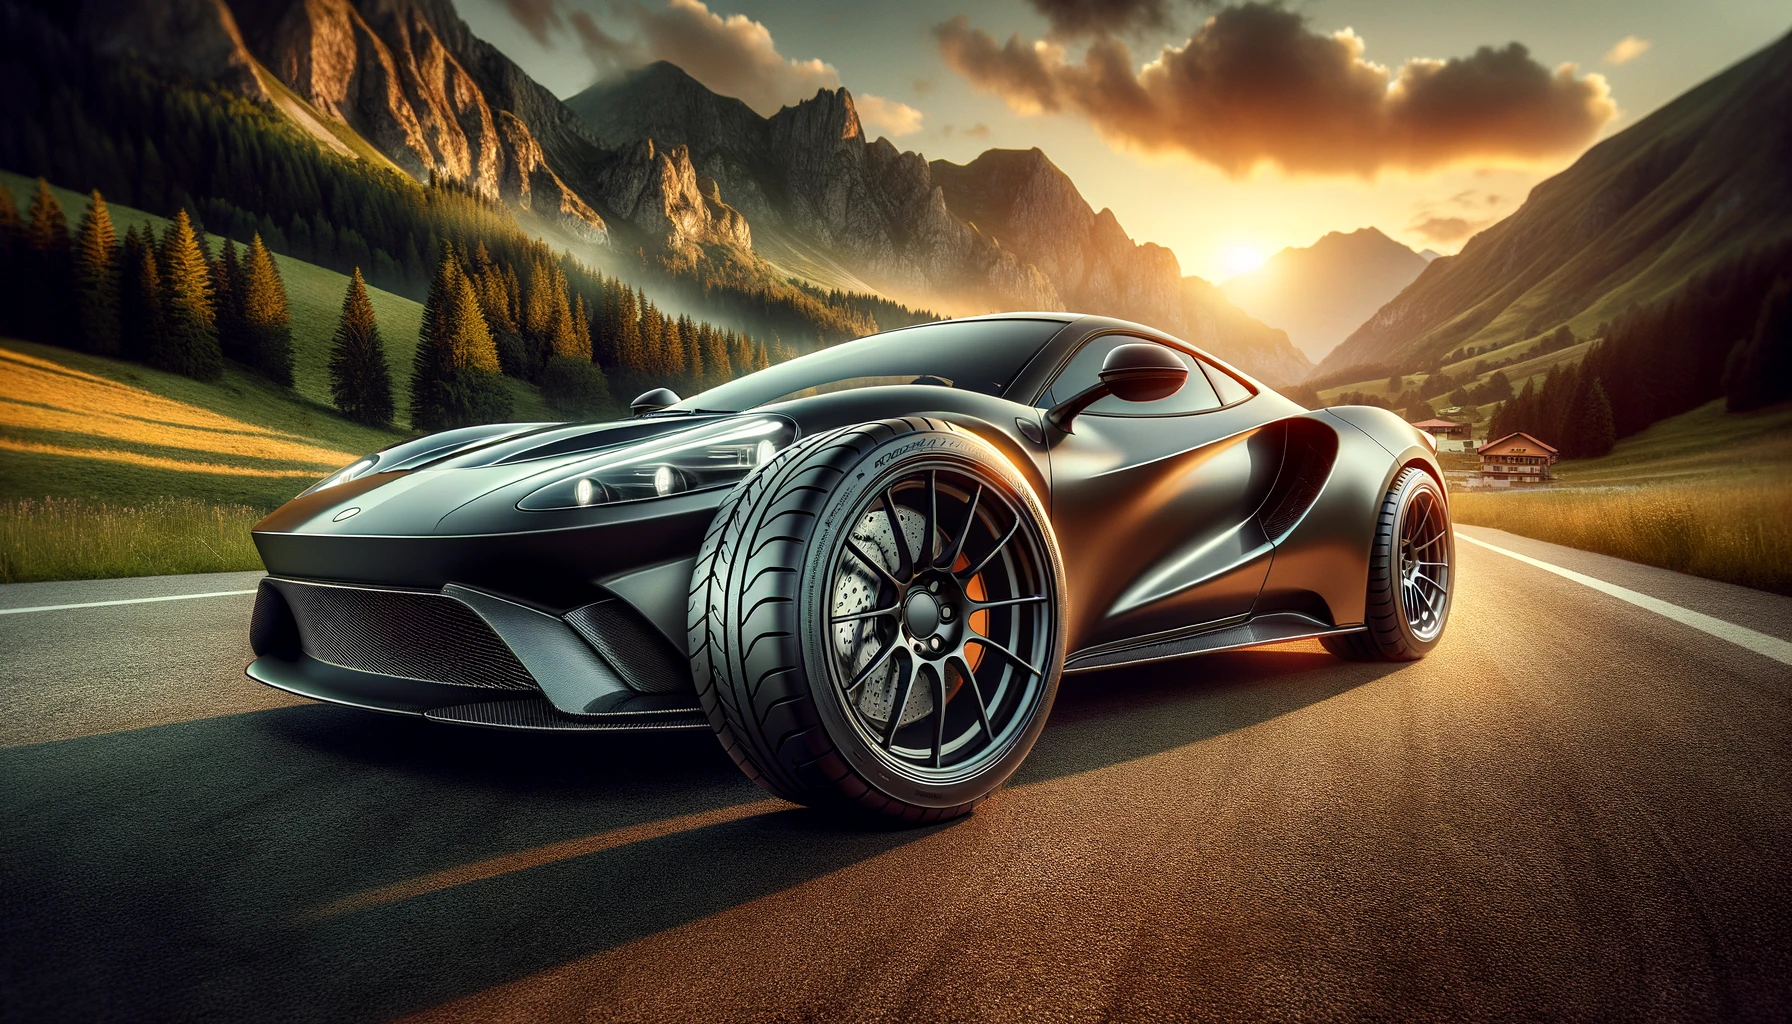 A sleek, modern car fitted with Pirelli tires is parked on a picturesque mountain road at sunset. The car is a high-performance sports model, showcasing the stylish and durable appearance of the tires. The scene emphasizes the quality and cost-effectiveness of Pirelli tires, highlighting the tires' prominent logo and tread pattern. The background features a scenic view with lush greenery and a stunning sunset sky, enhancing the overall luxurious and efficient image of the product. The image is in a 16:9 aspect ratio.